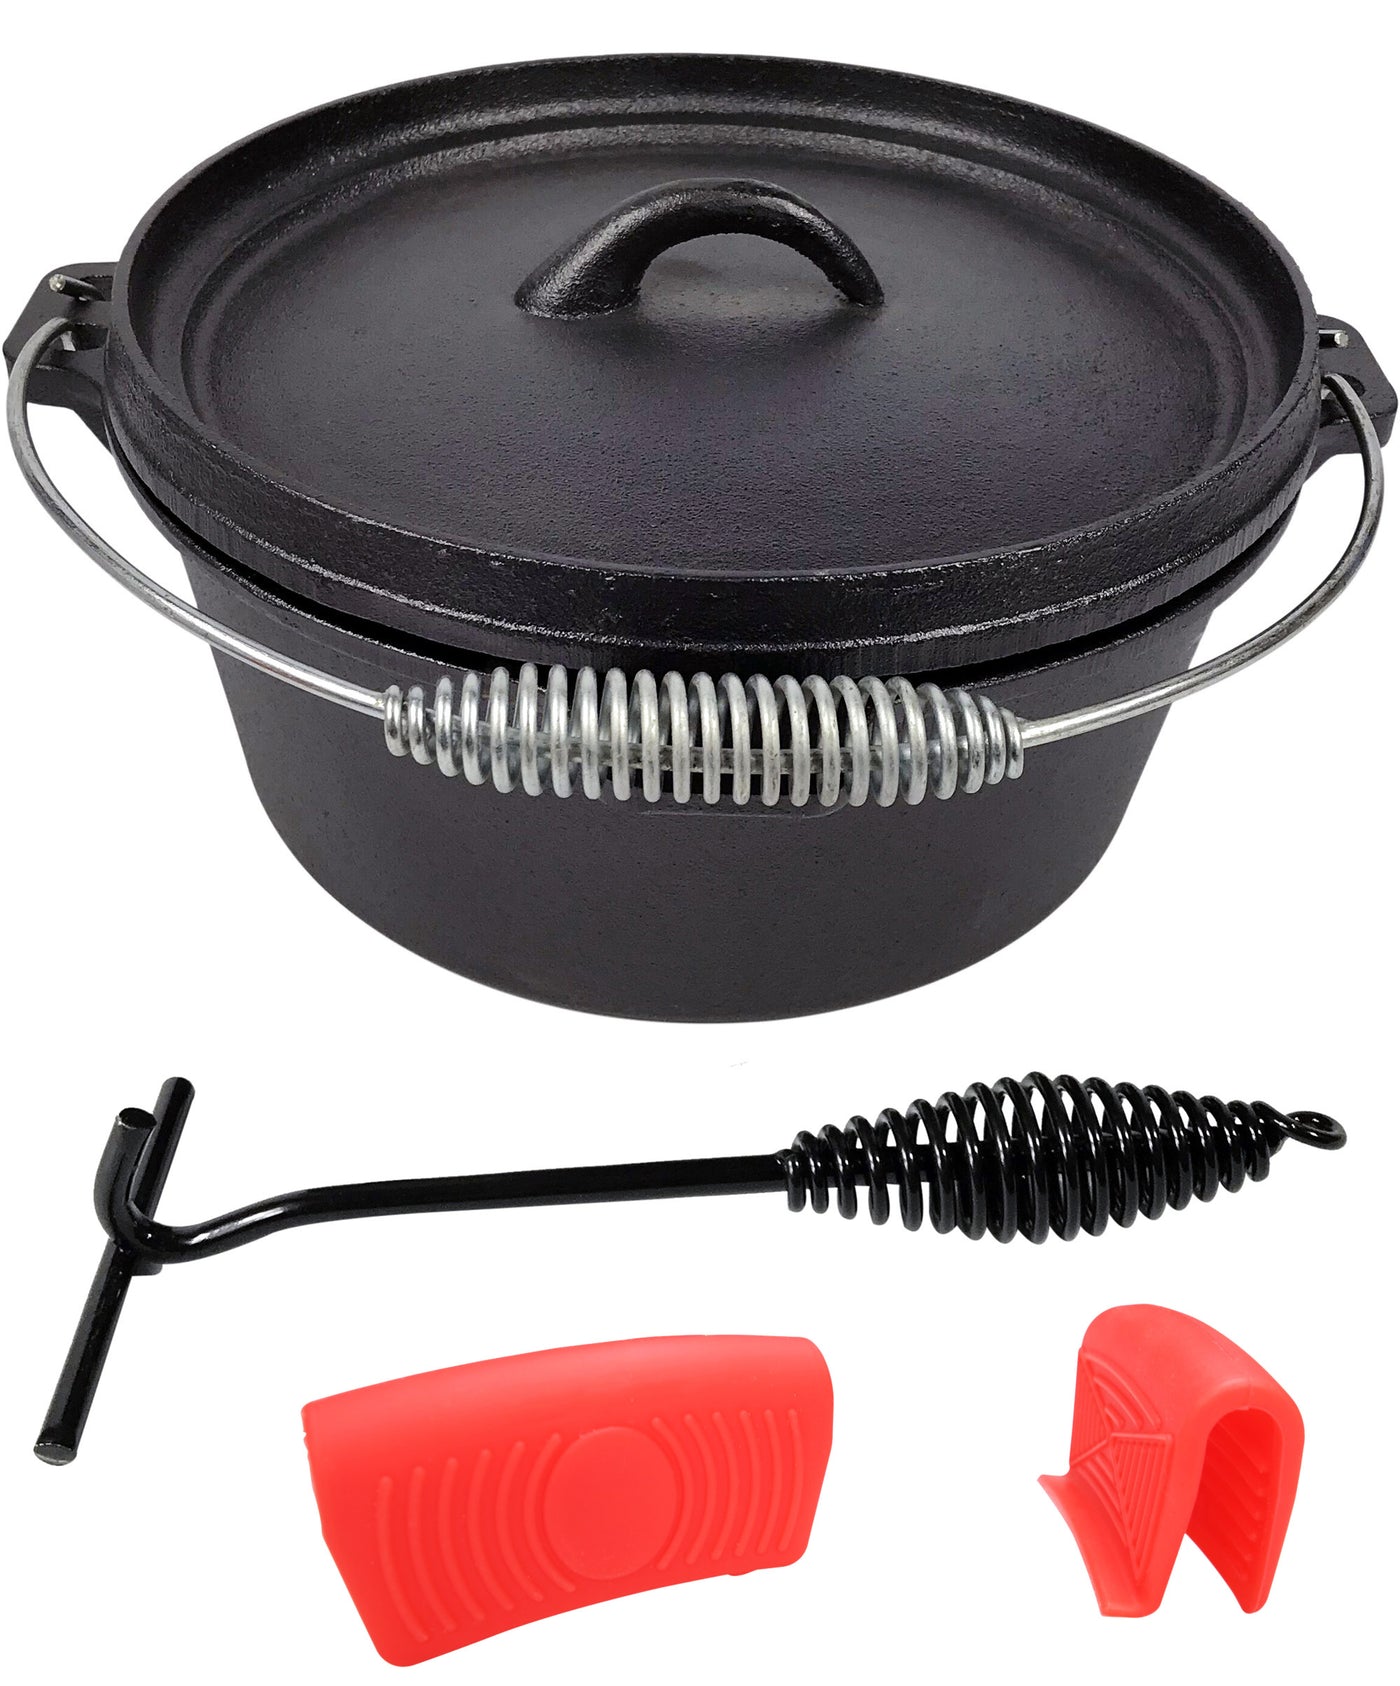 Dutch Oven Lid Lifter for Outdoor Campfire Cooking. the Lid Shown is for a  Standard Cast Iron Pot and is Not Included. 